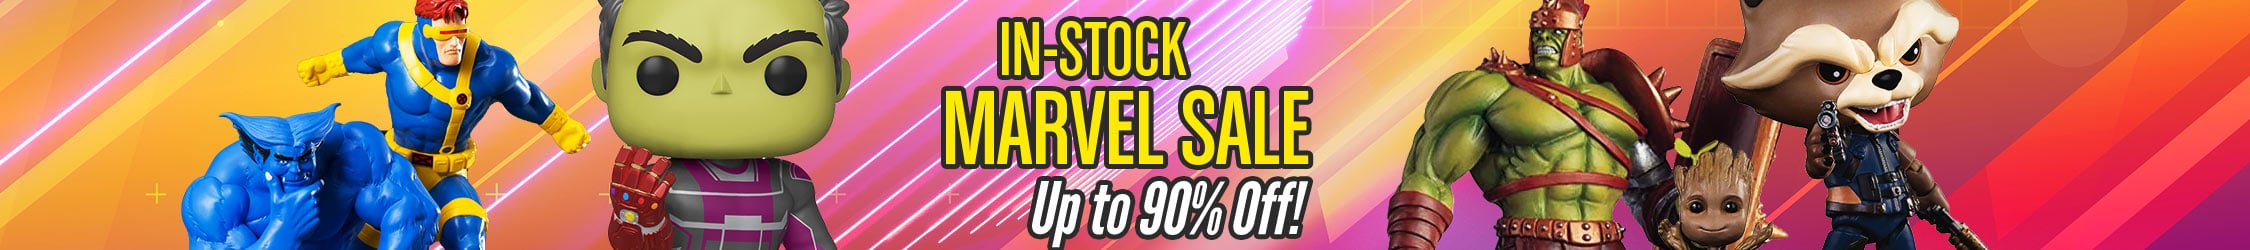 In-Stock Marvel and More Sale - Up to 90% Off